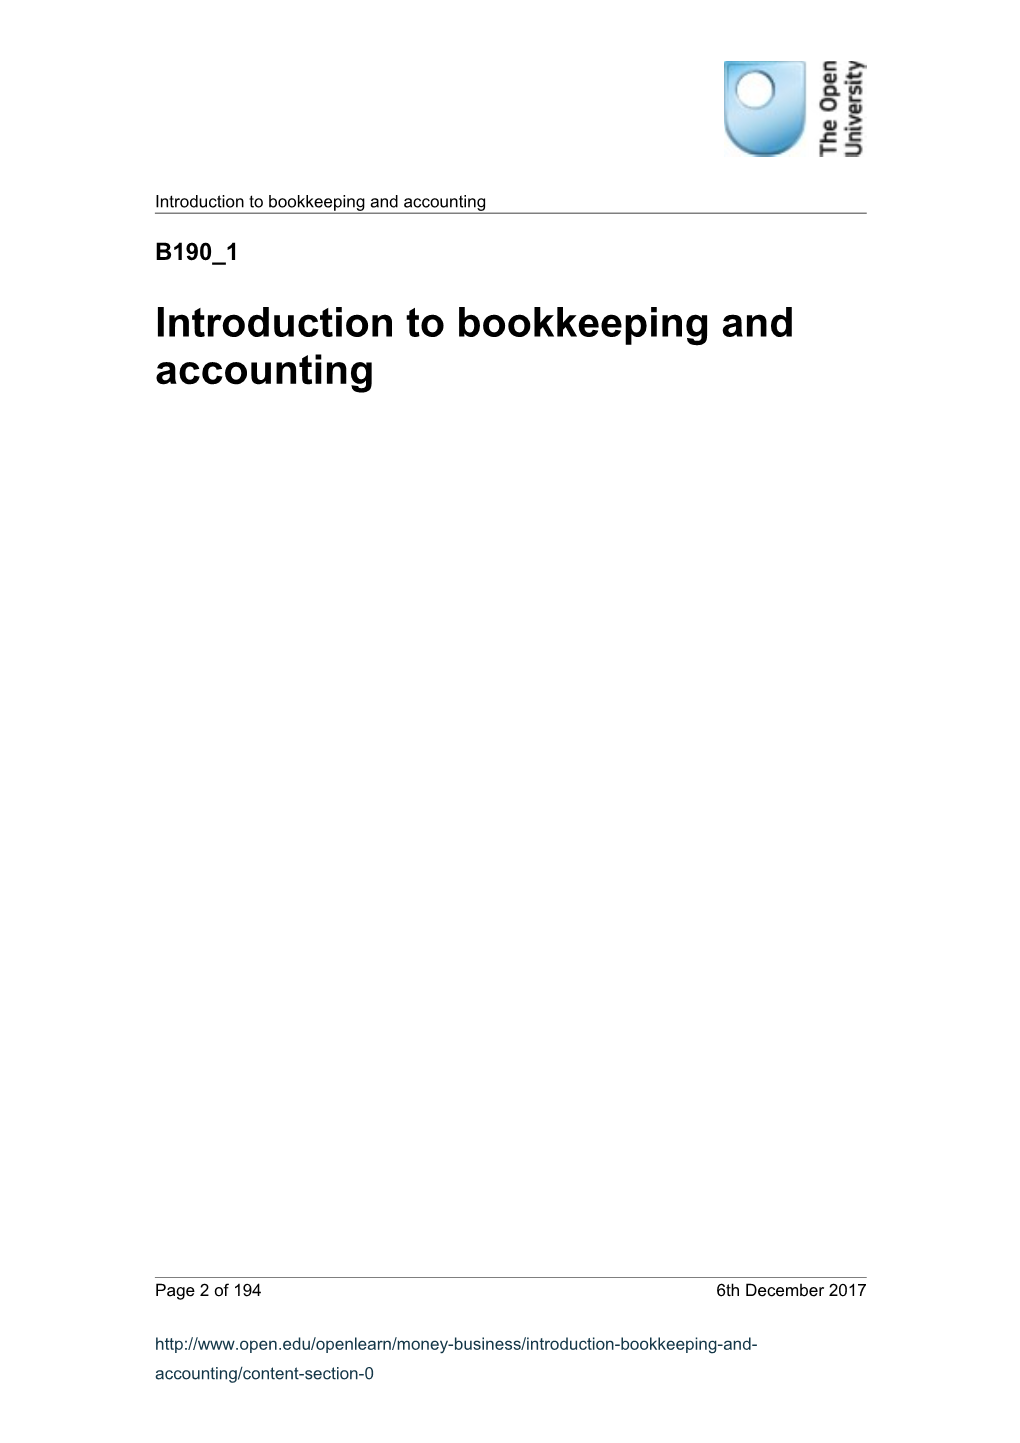 Introduction to Bookkeeping and Accounting